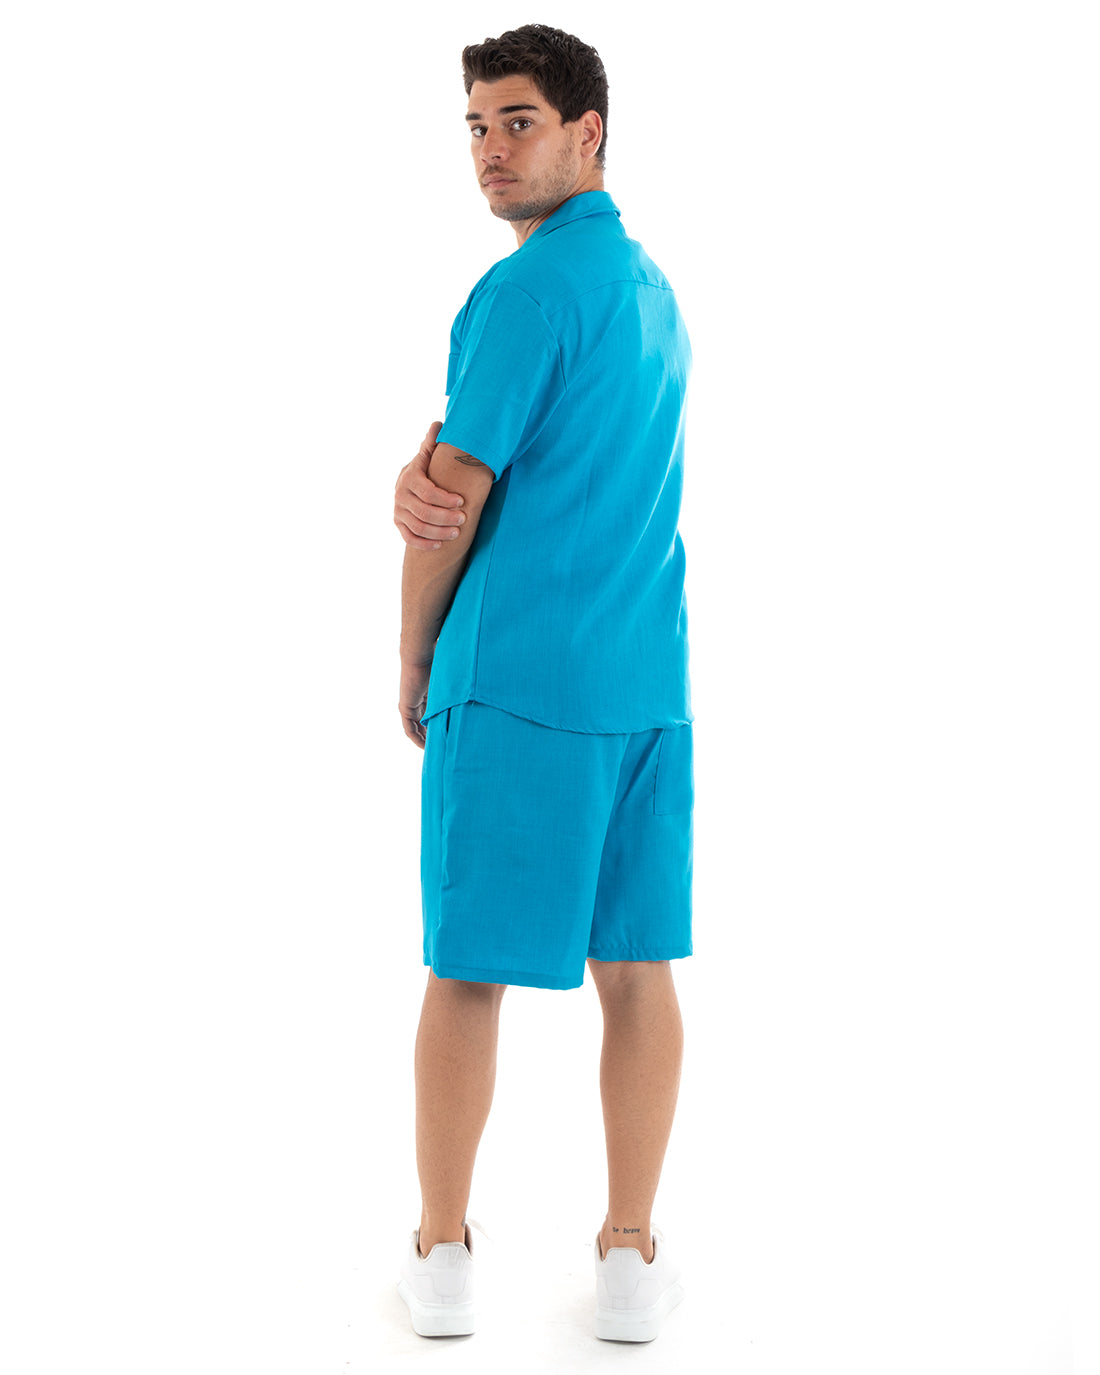 Complete Coordinated Set for Men Viscose Shirt with Bermuda Collar Outfit Turquoise GIOSAL-OU2371A